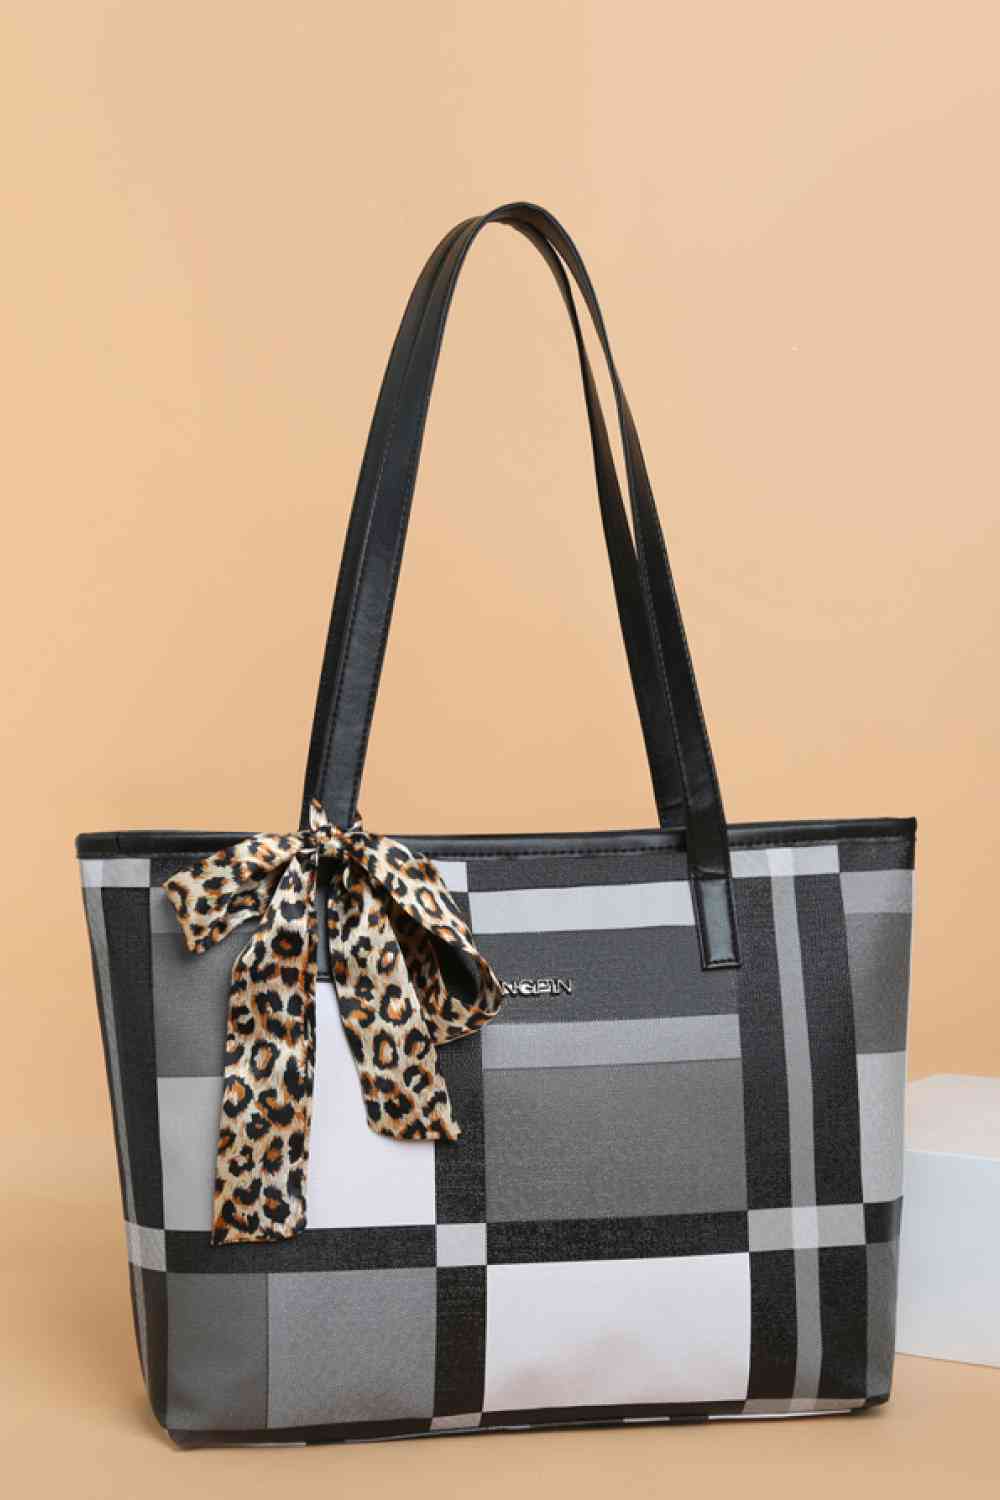 Adored Color Block Tie Detail PU Leather Tote Bag Dark Gray One Size